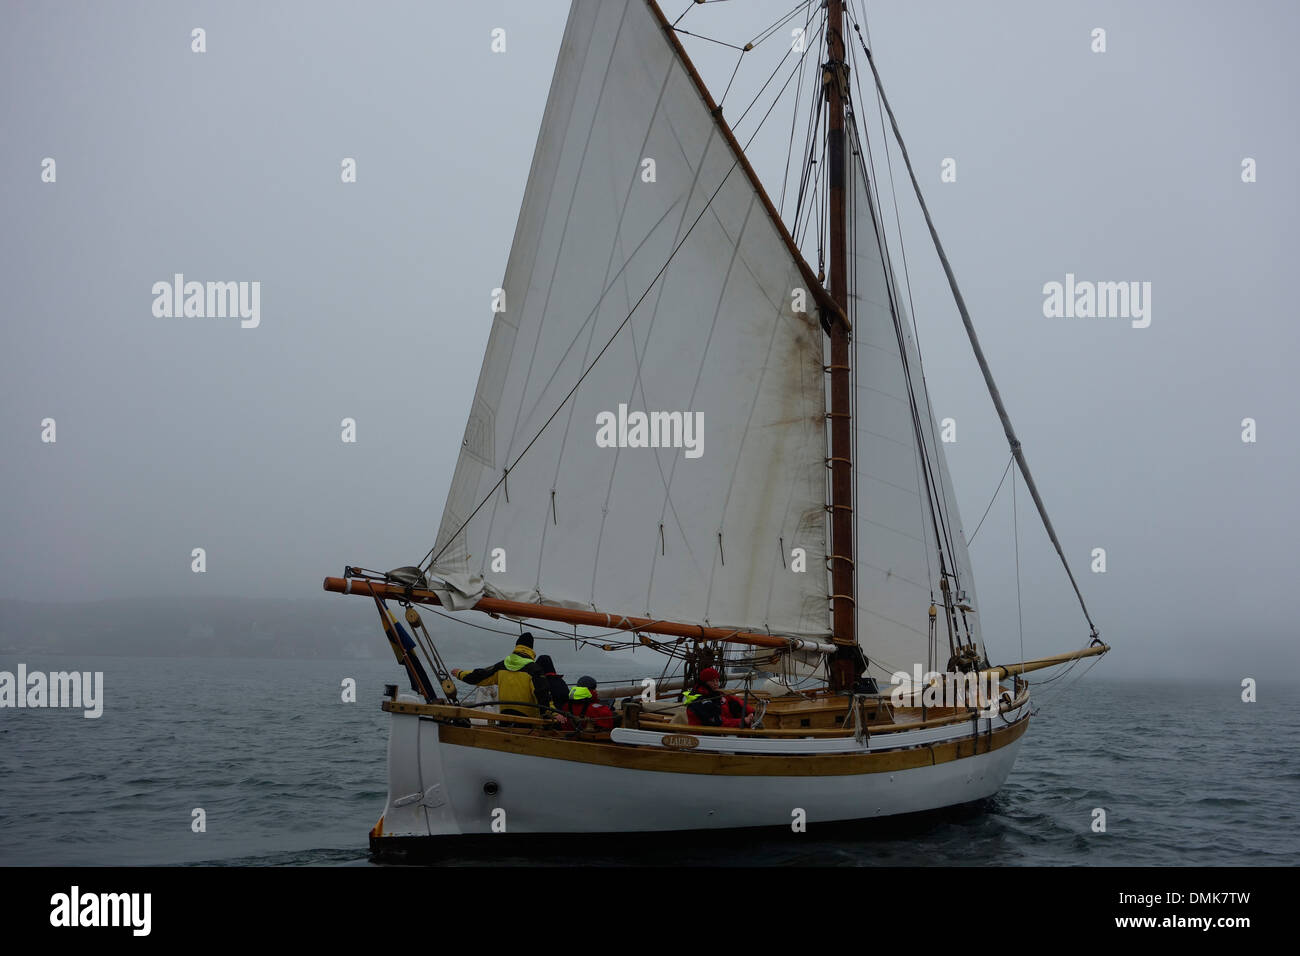 Gaff rigged sloop with sails on starboard tack sails into dense fog Stock Photo